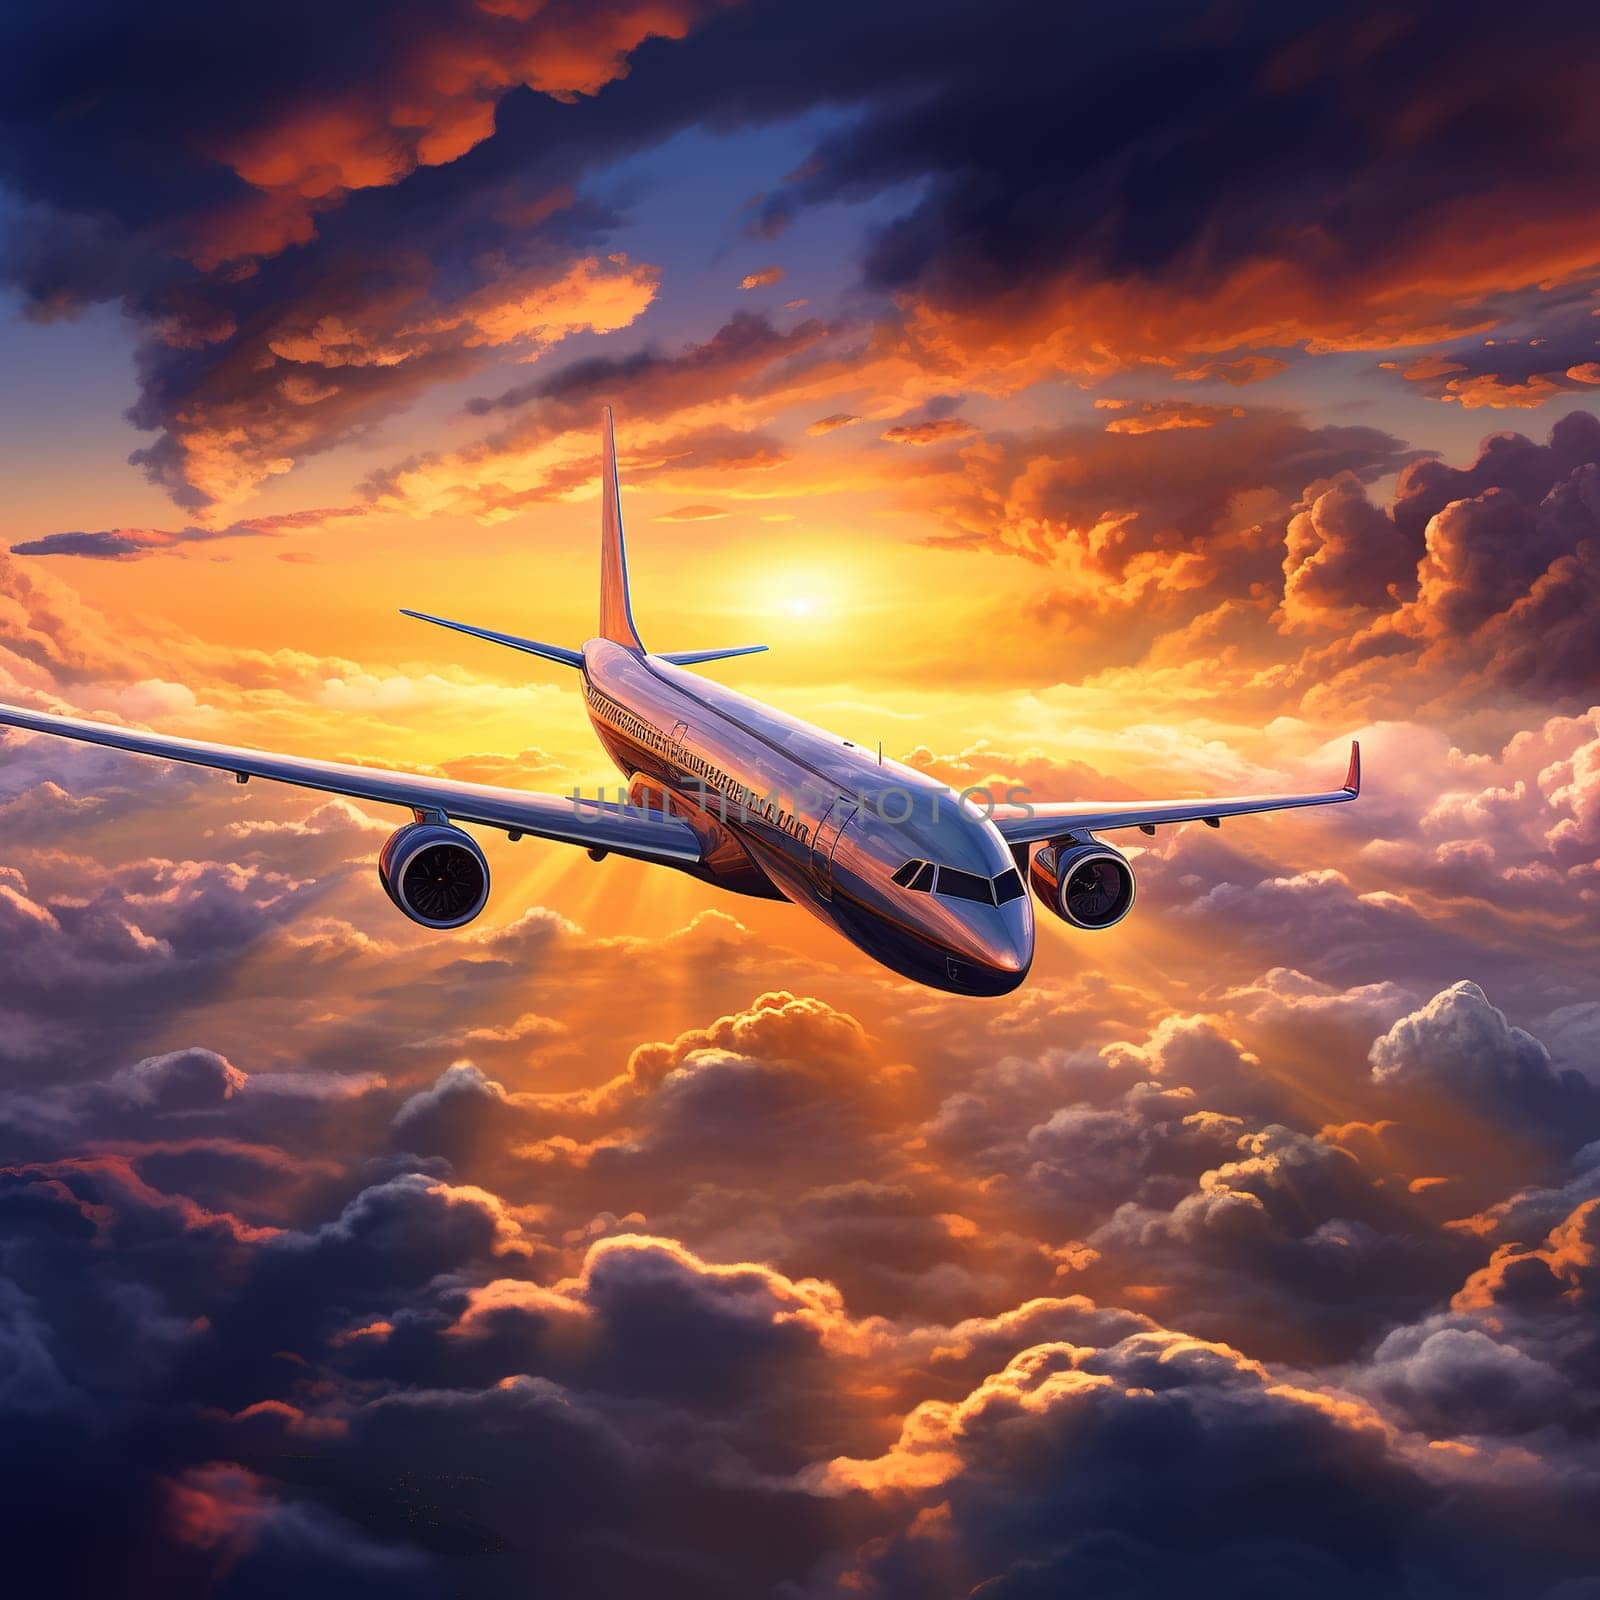 Airplane or airliner in the sky during lovely sunset, transportation concept by Kadula